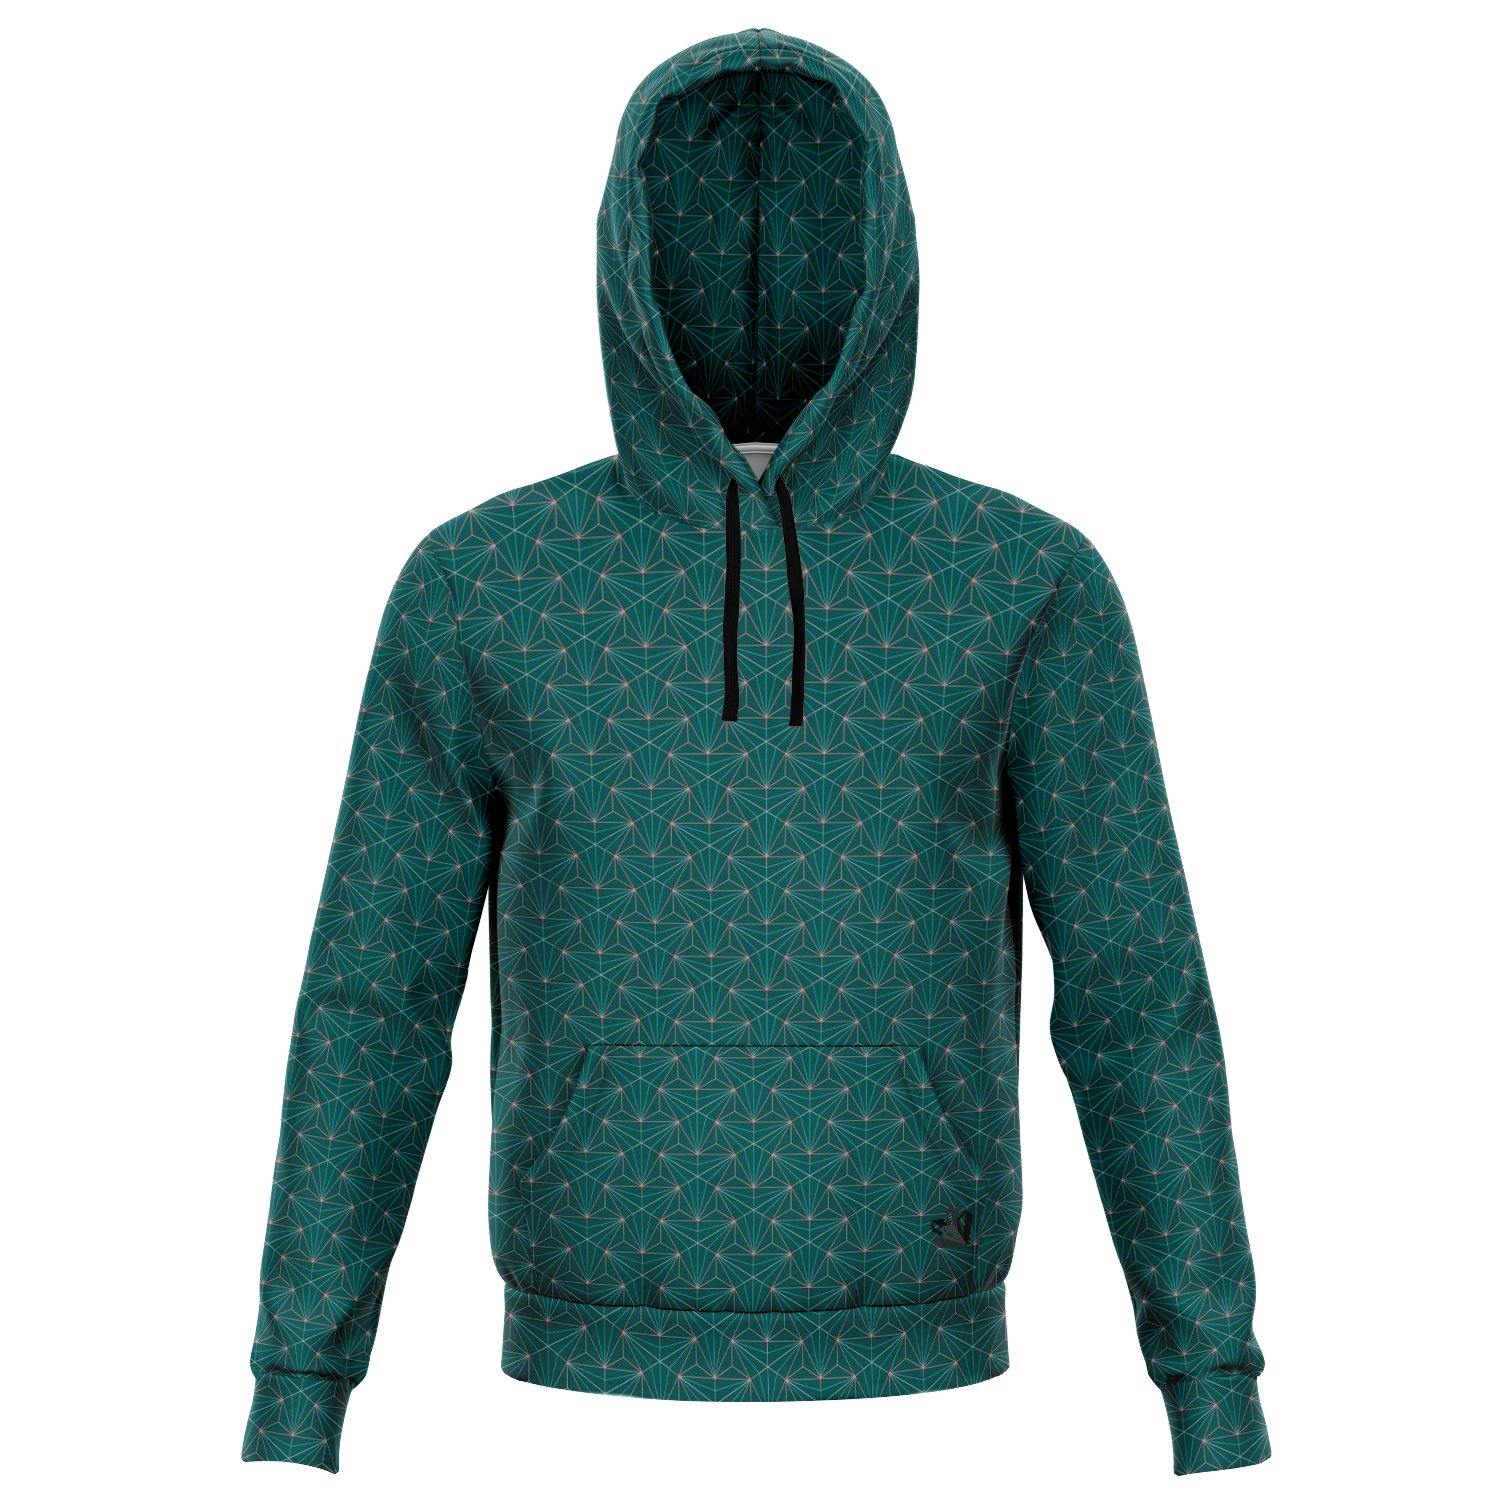 Turquoise Sacred Connections Premium Pullover Hoodie - Manifestie